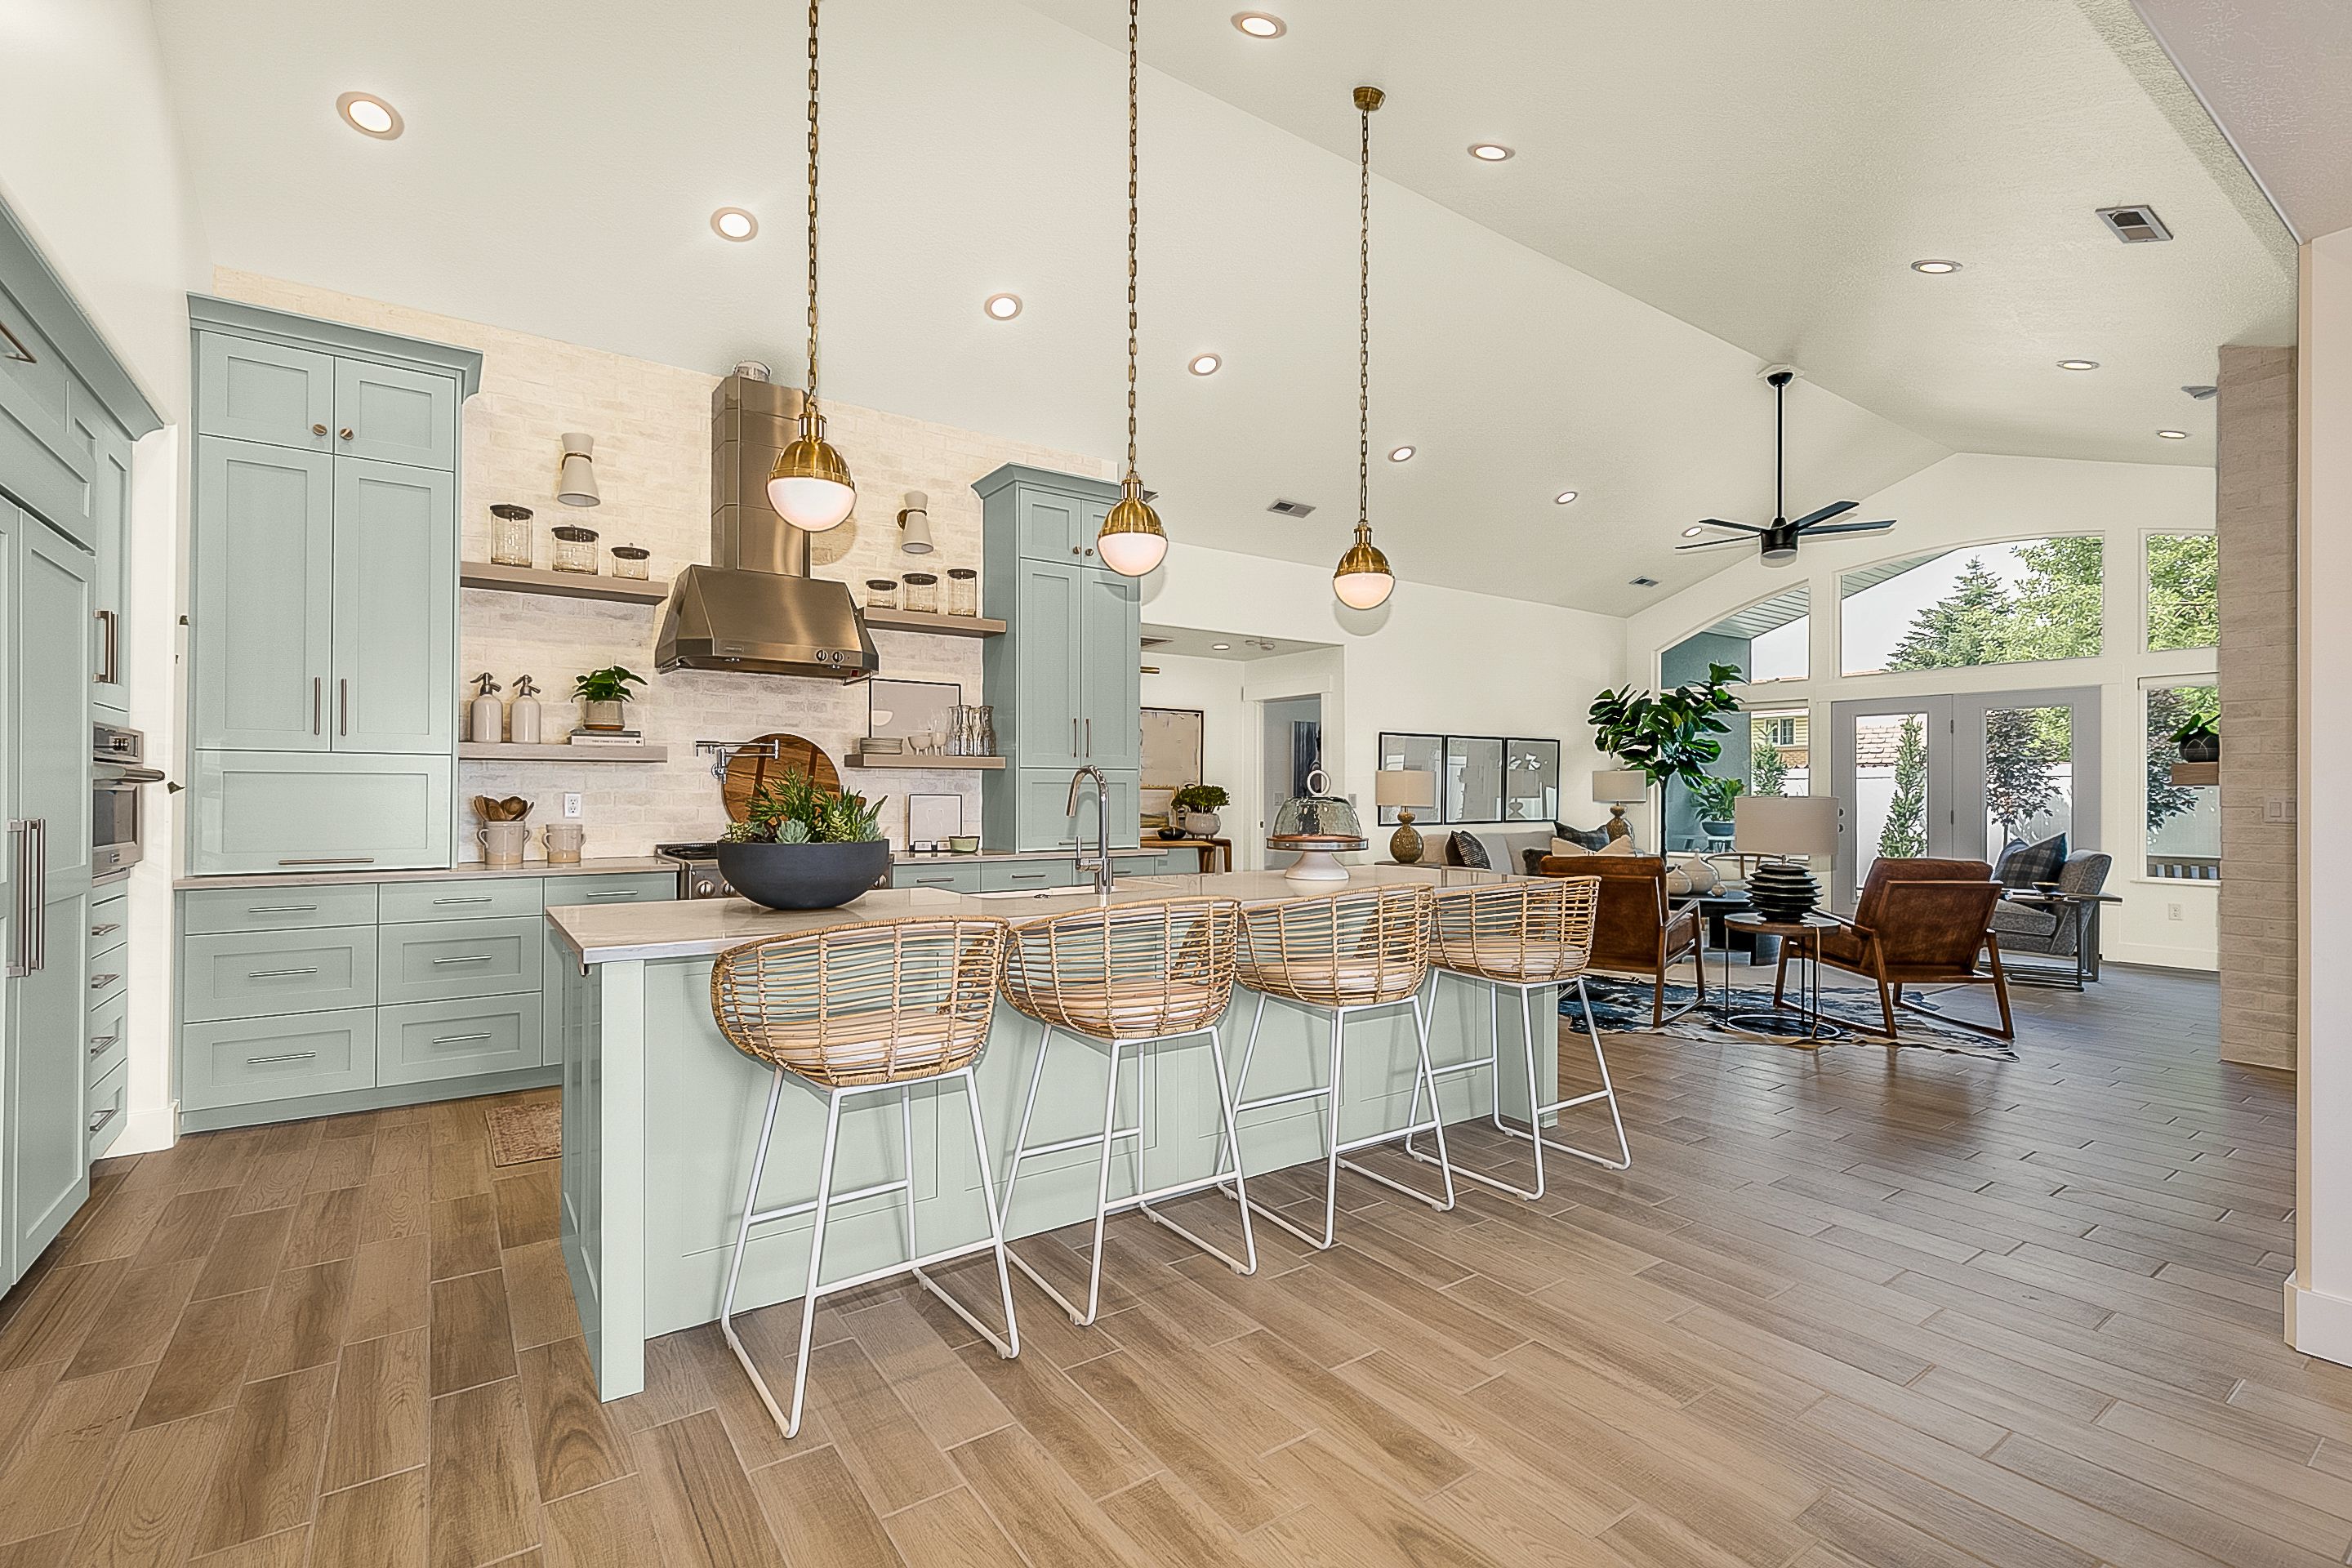 Joanna Gaines Shares Her Favorite Cozy Kitchen Color Combinations